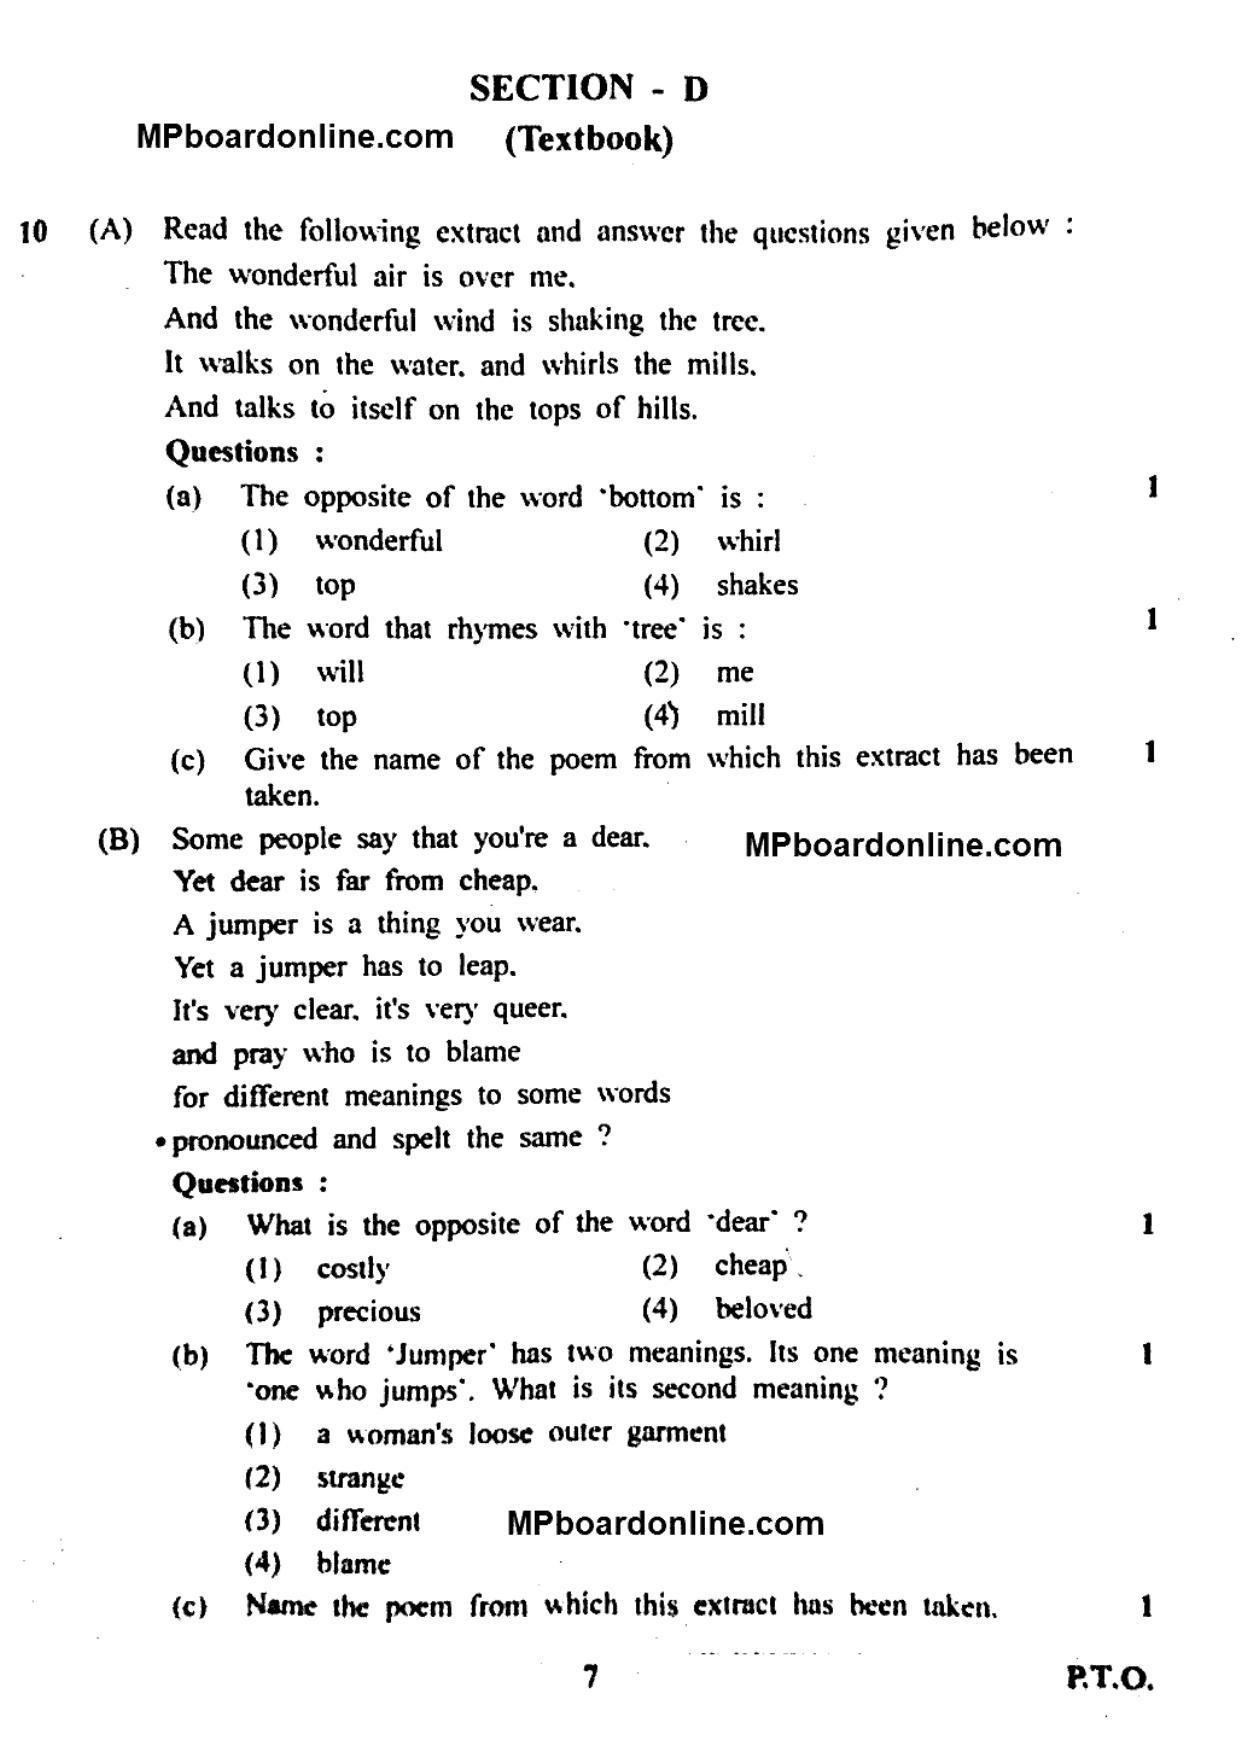 MP Board Class 12 English General 2018 Question Paper - Page 7